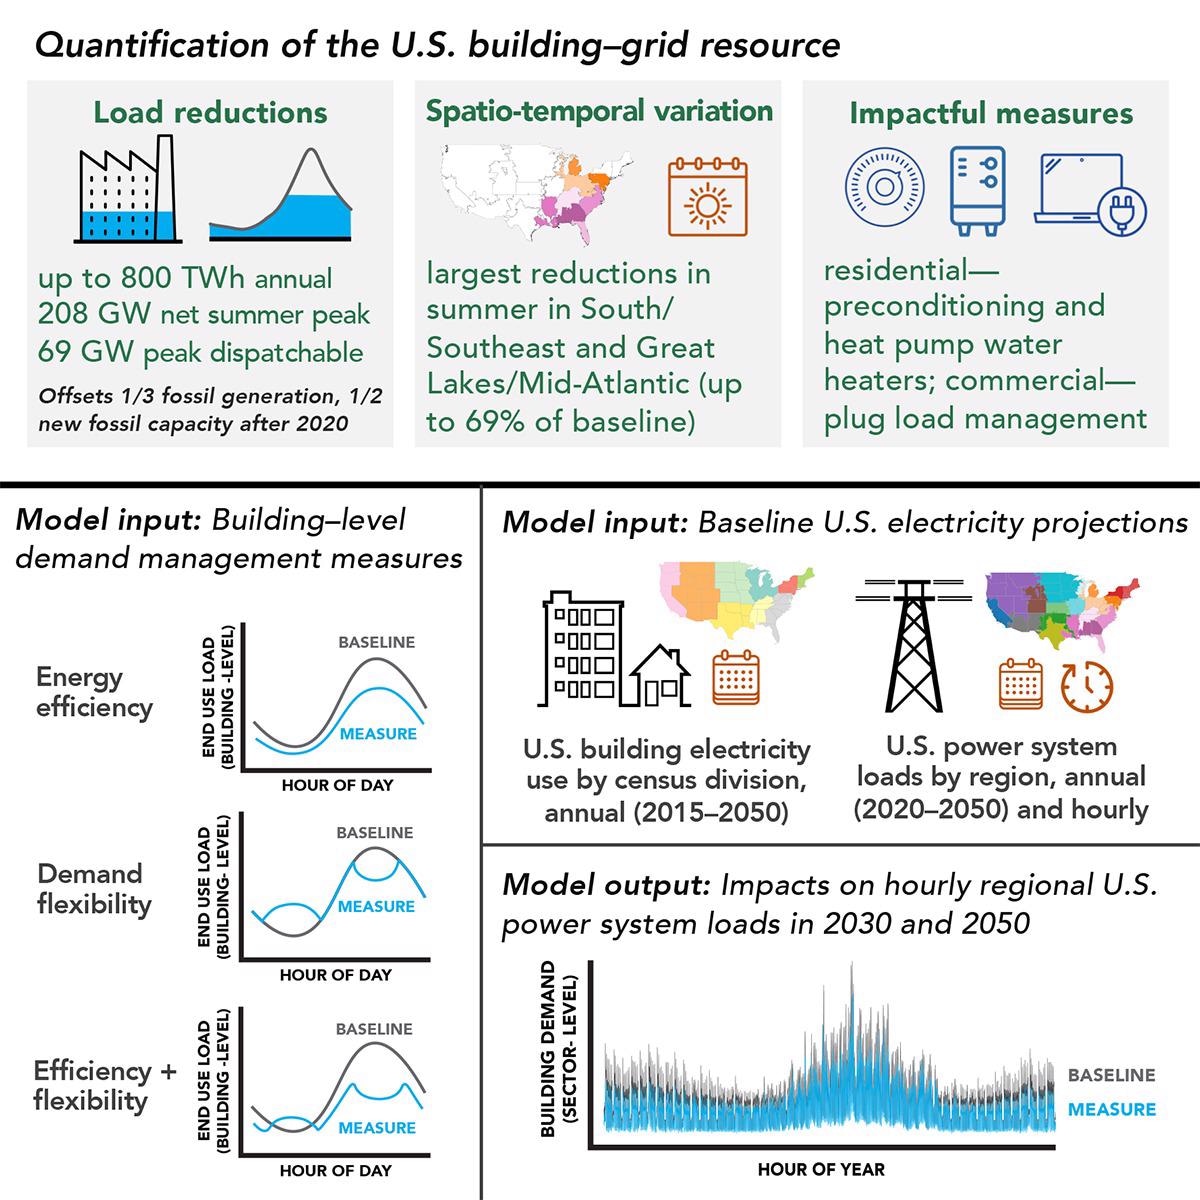 Better Building Management Could Help Enhance Efficiency, Flexibility of Electric Grid.